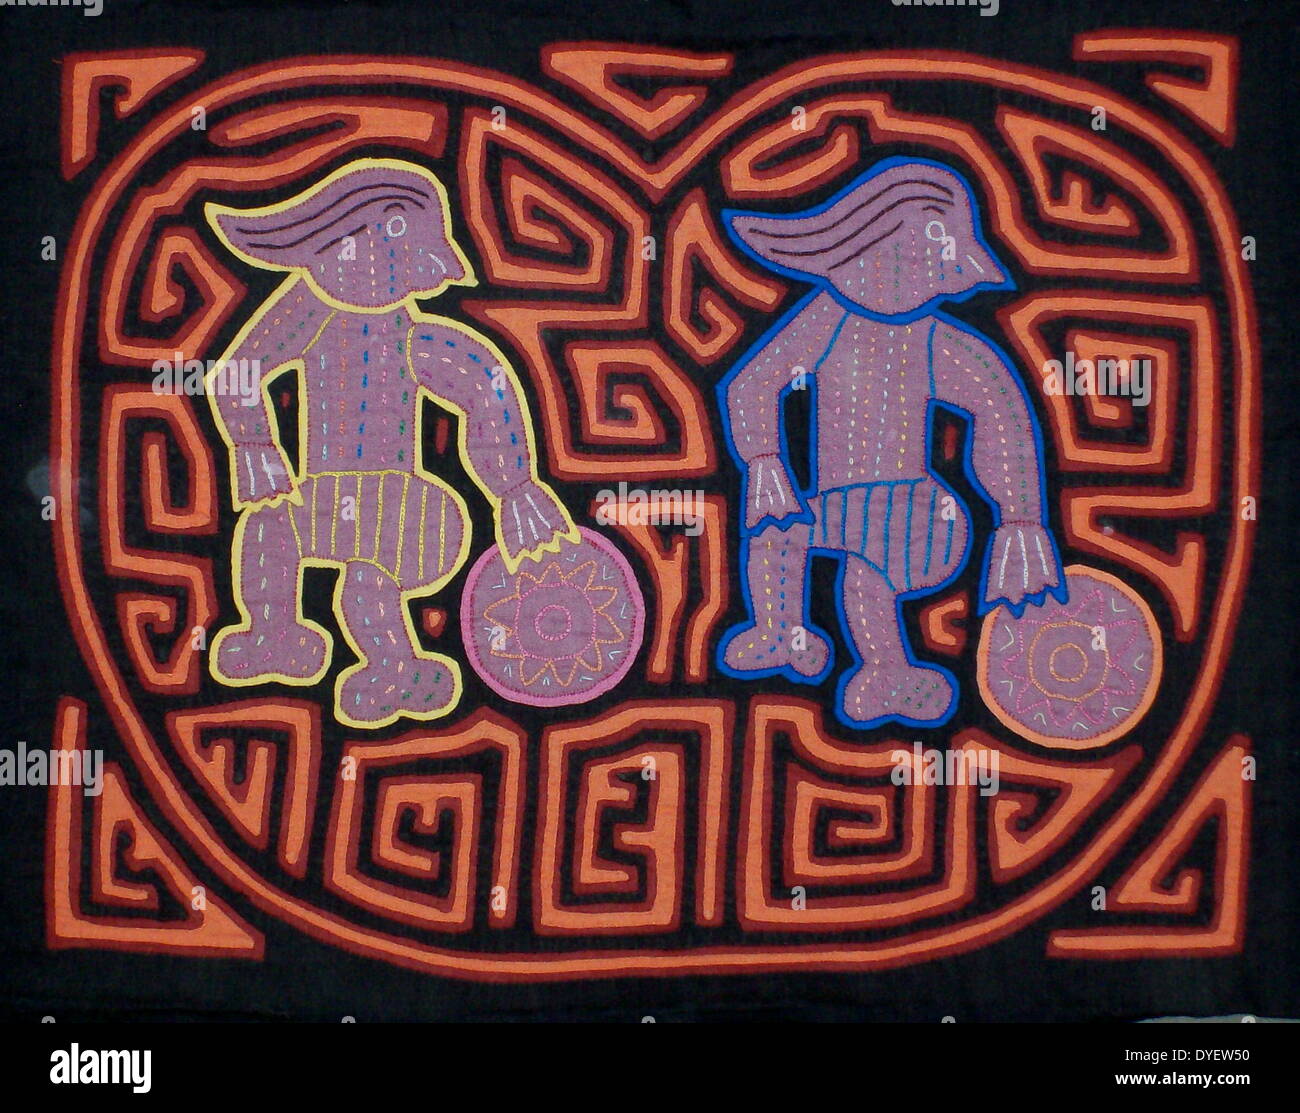 Mola textile by Kuna Indian artist, depicting a modern influence on the Kuna culture. From the San Blas Archipelago, Panama.  Reverse applique design worn on female blouse. Two footballers. Stock Photo